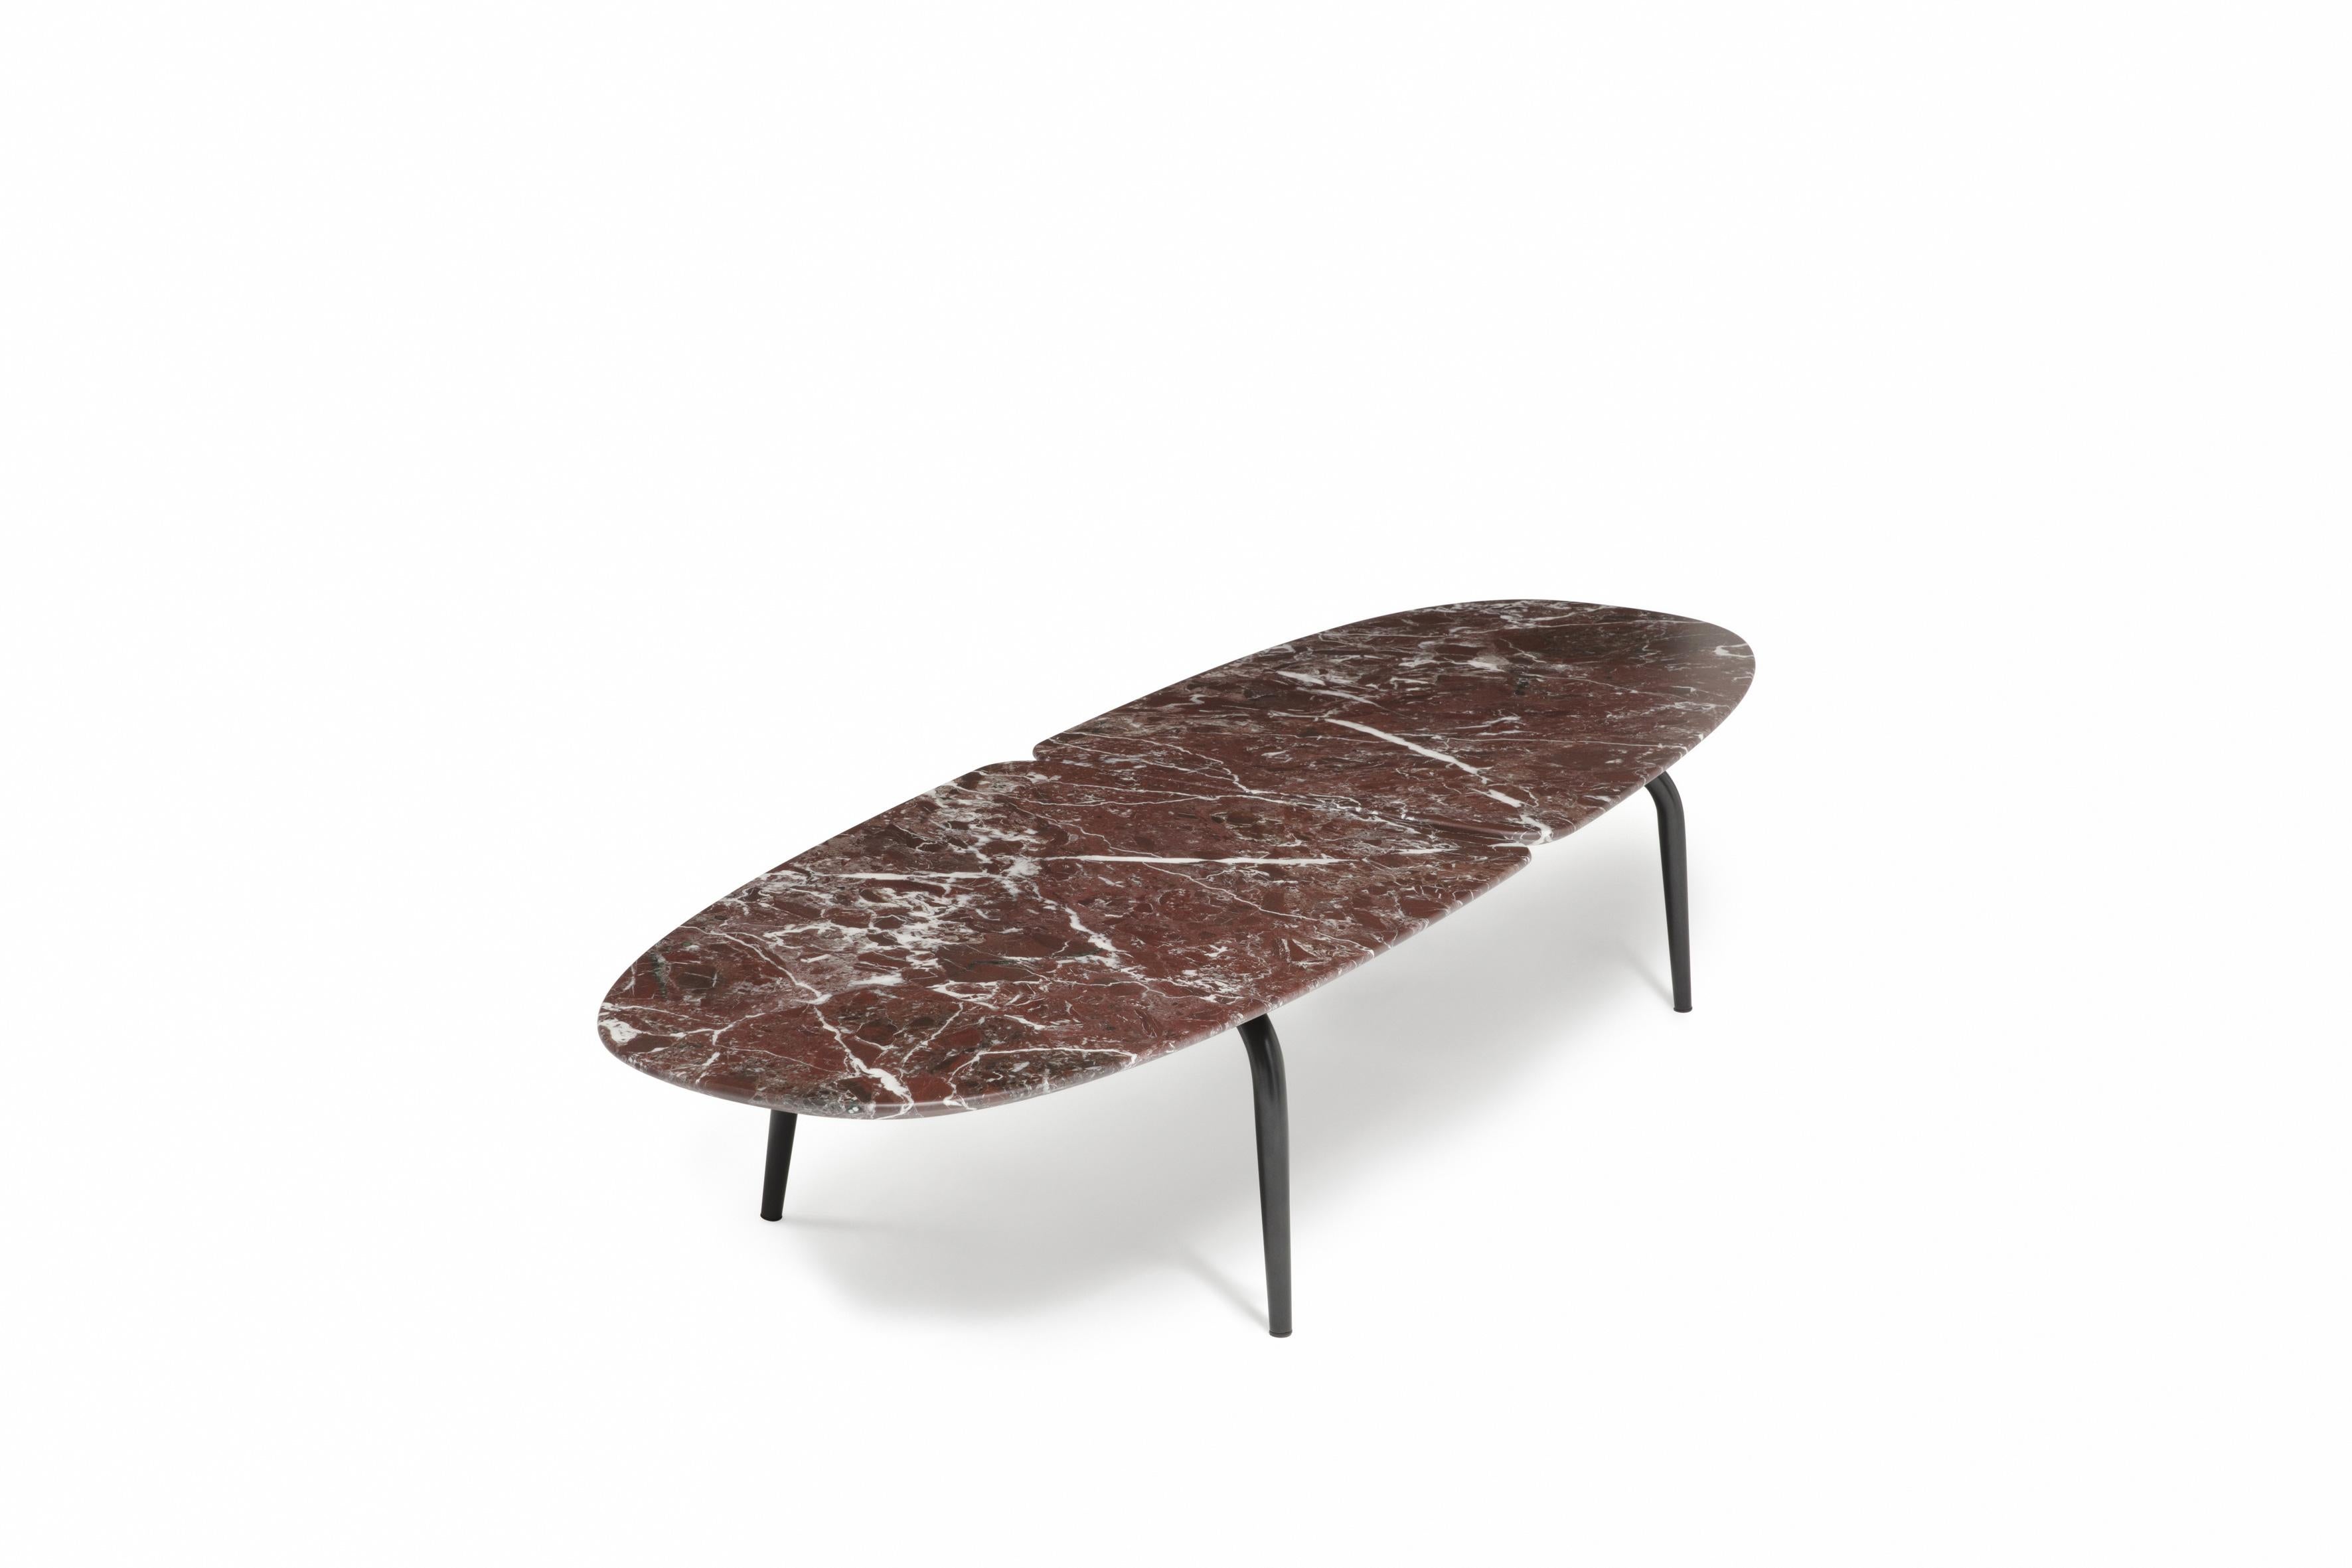 Black varnished steel frame. Tops available either in grey Calacatta marble, in red Lepanto marble or in Sahara Noir marble with stain-resistant protective varnish, in clear matt polyester.

Additional Information:
Material: Marble, steel